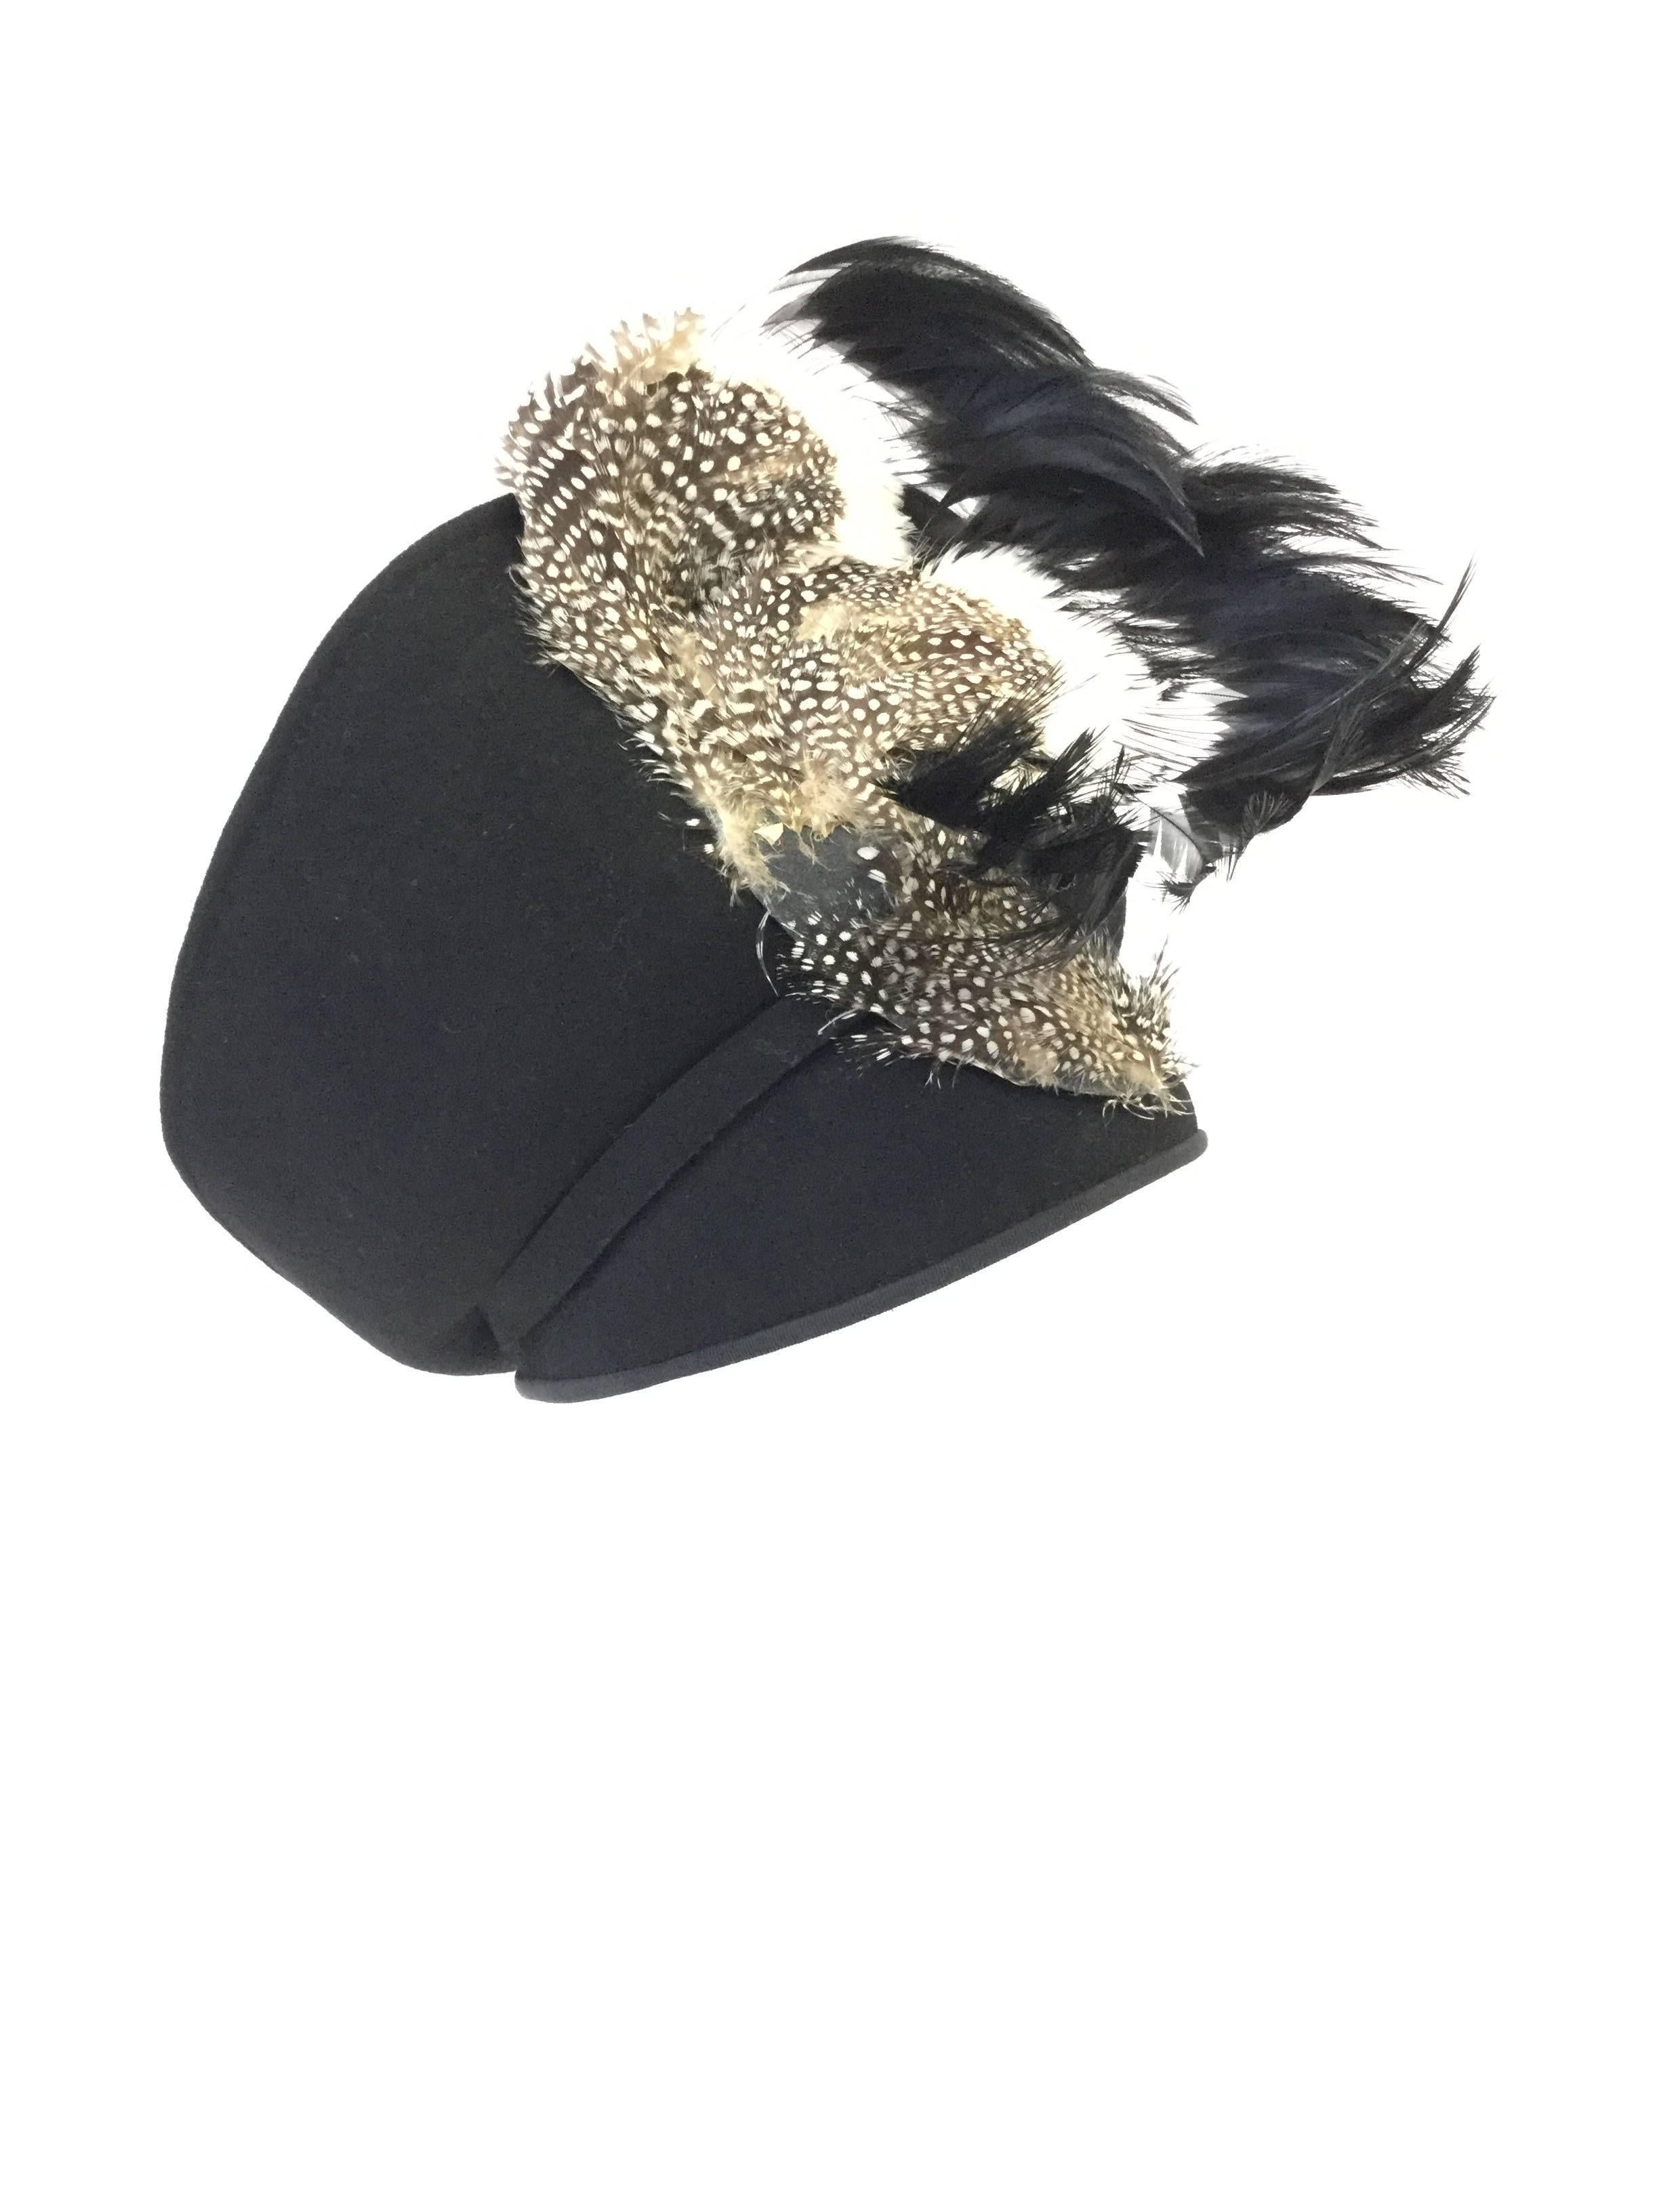 
Absolutely striking hat by Jack McConnell boutique! This sculptural hat features a black felt base consisting of a rounded base that fits snuggly on the wearer's head, and a tiara-like brim. The upturned brim is richly ornamented with guinea fowl